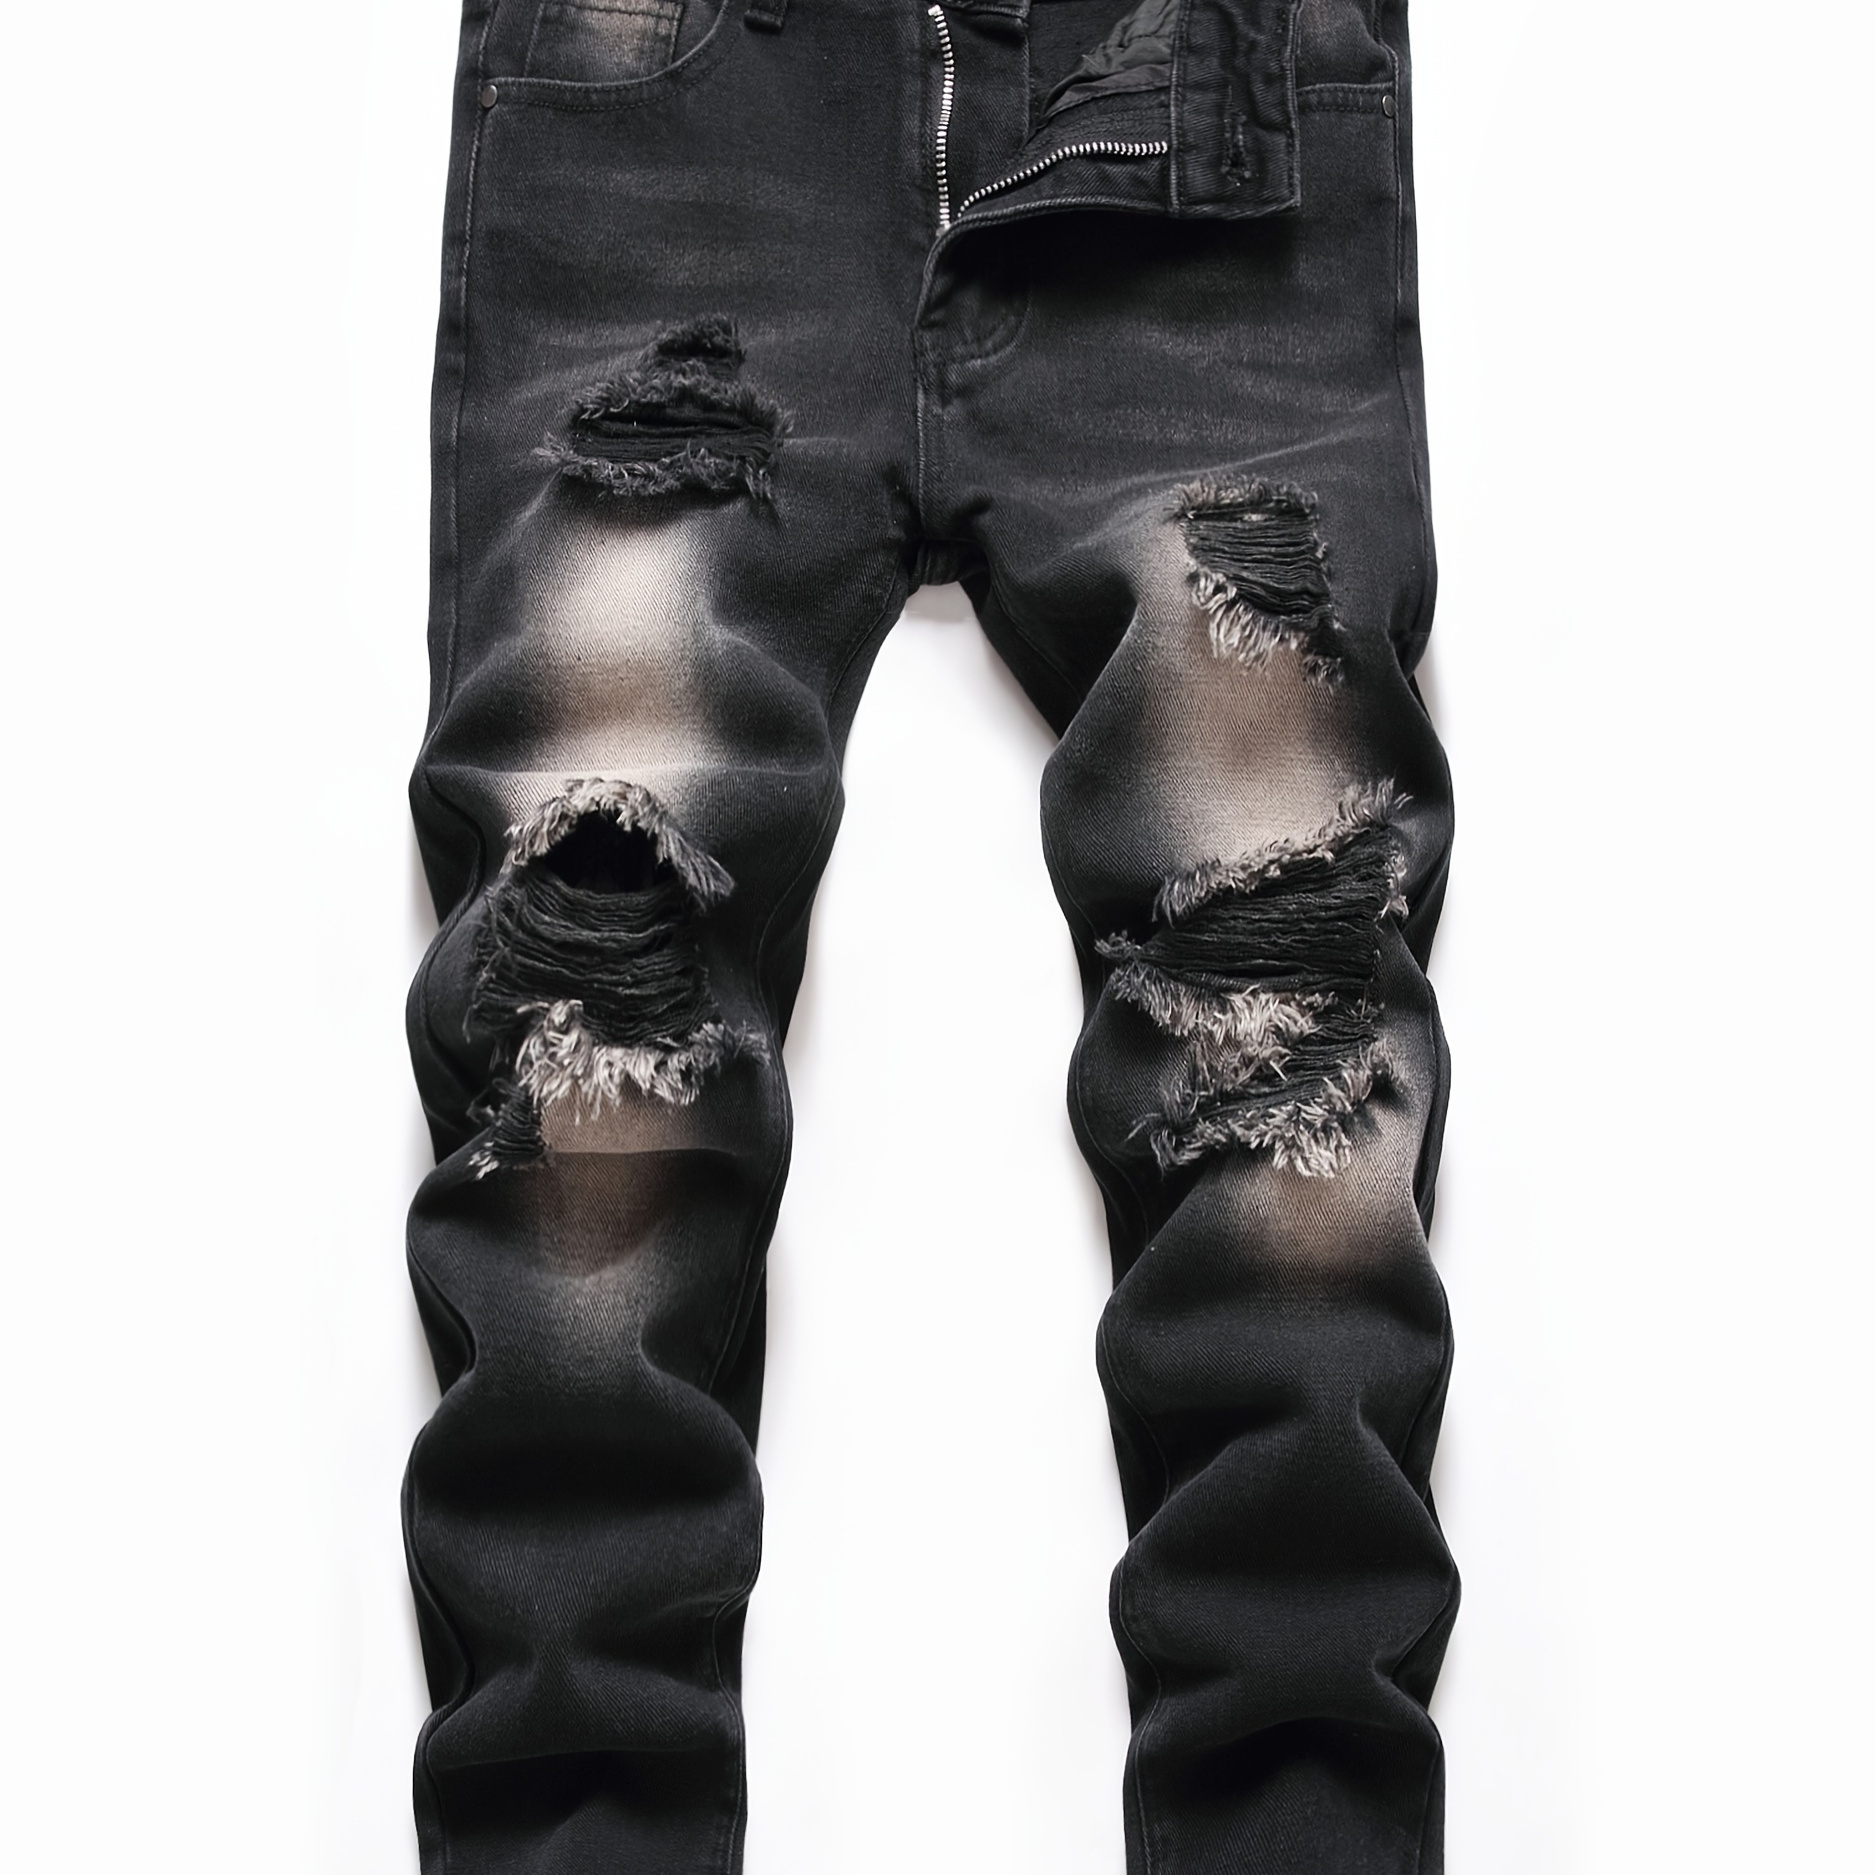 

Boys Black Ripped Distressed Stretch Jeans Skinny Slim Fit Washed Denim Pants Kids Clothes